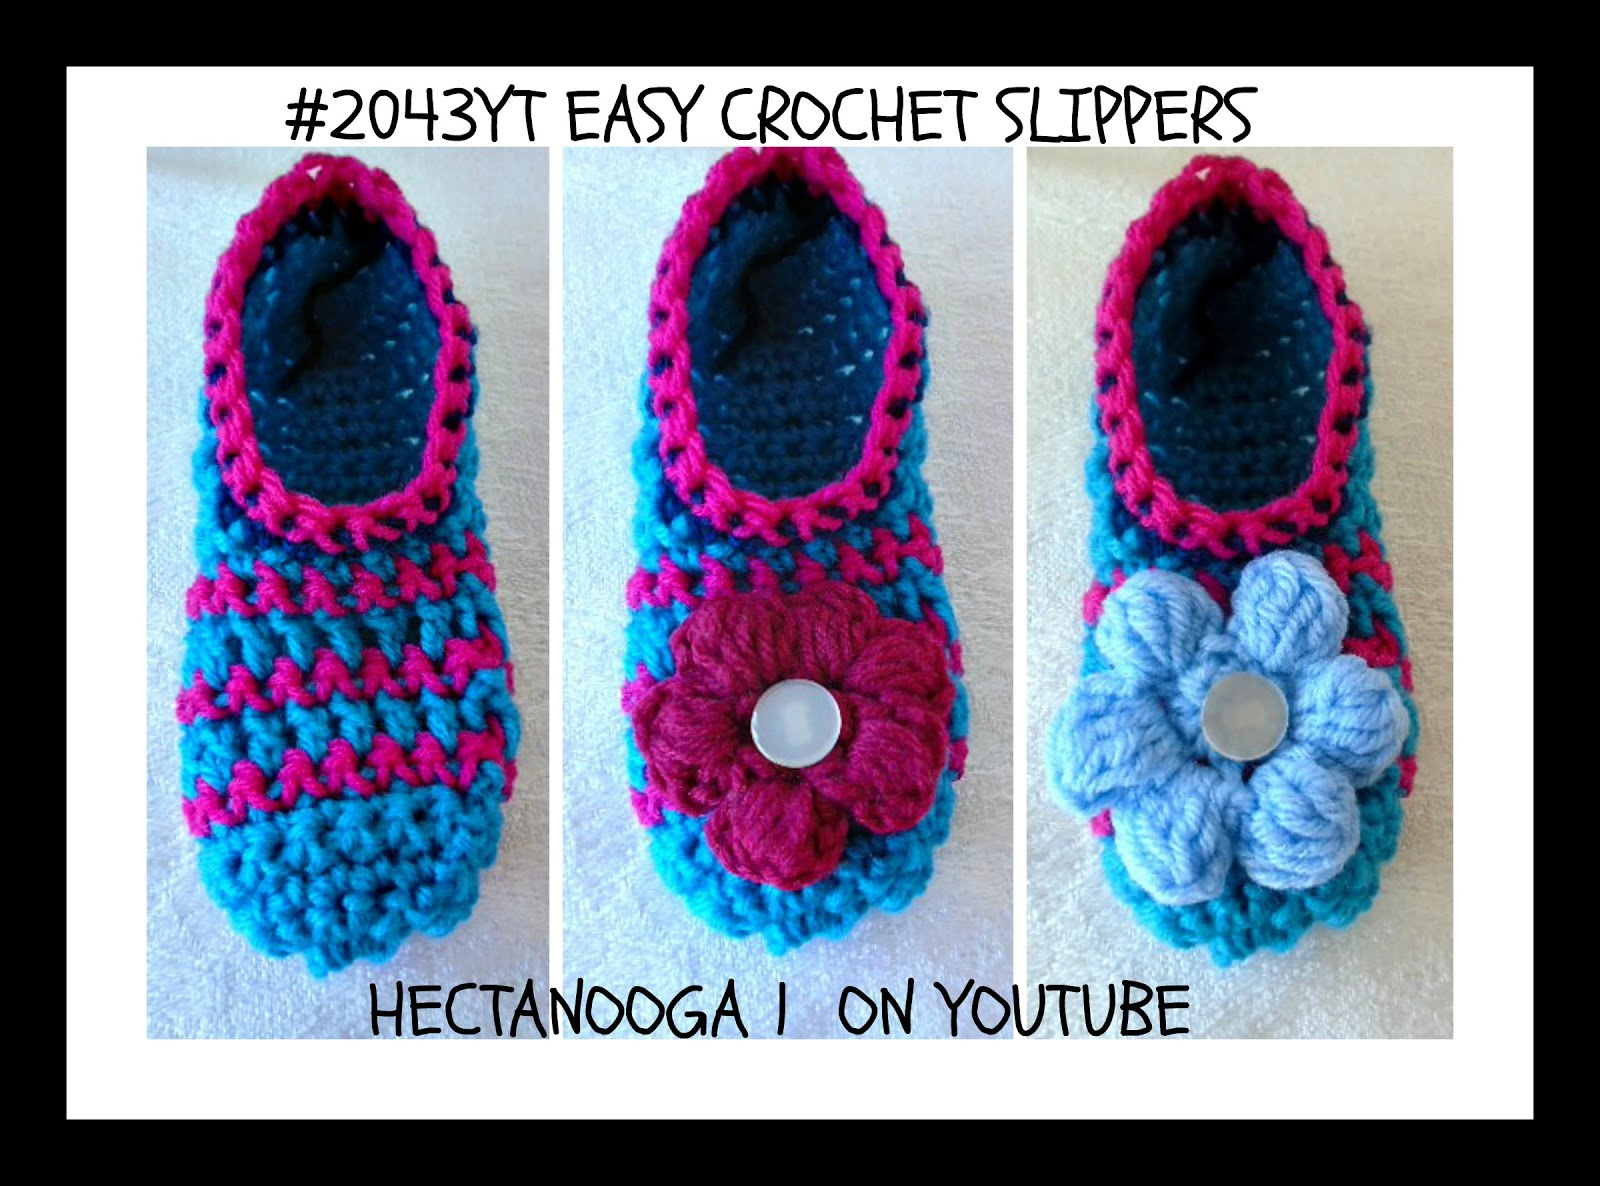 Crochet Slippers Pattern Free Hectanooga Patterns Free Crochet Pattern 2043yt Easy Crochet